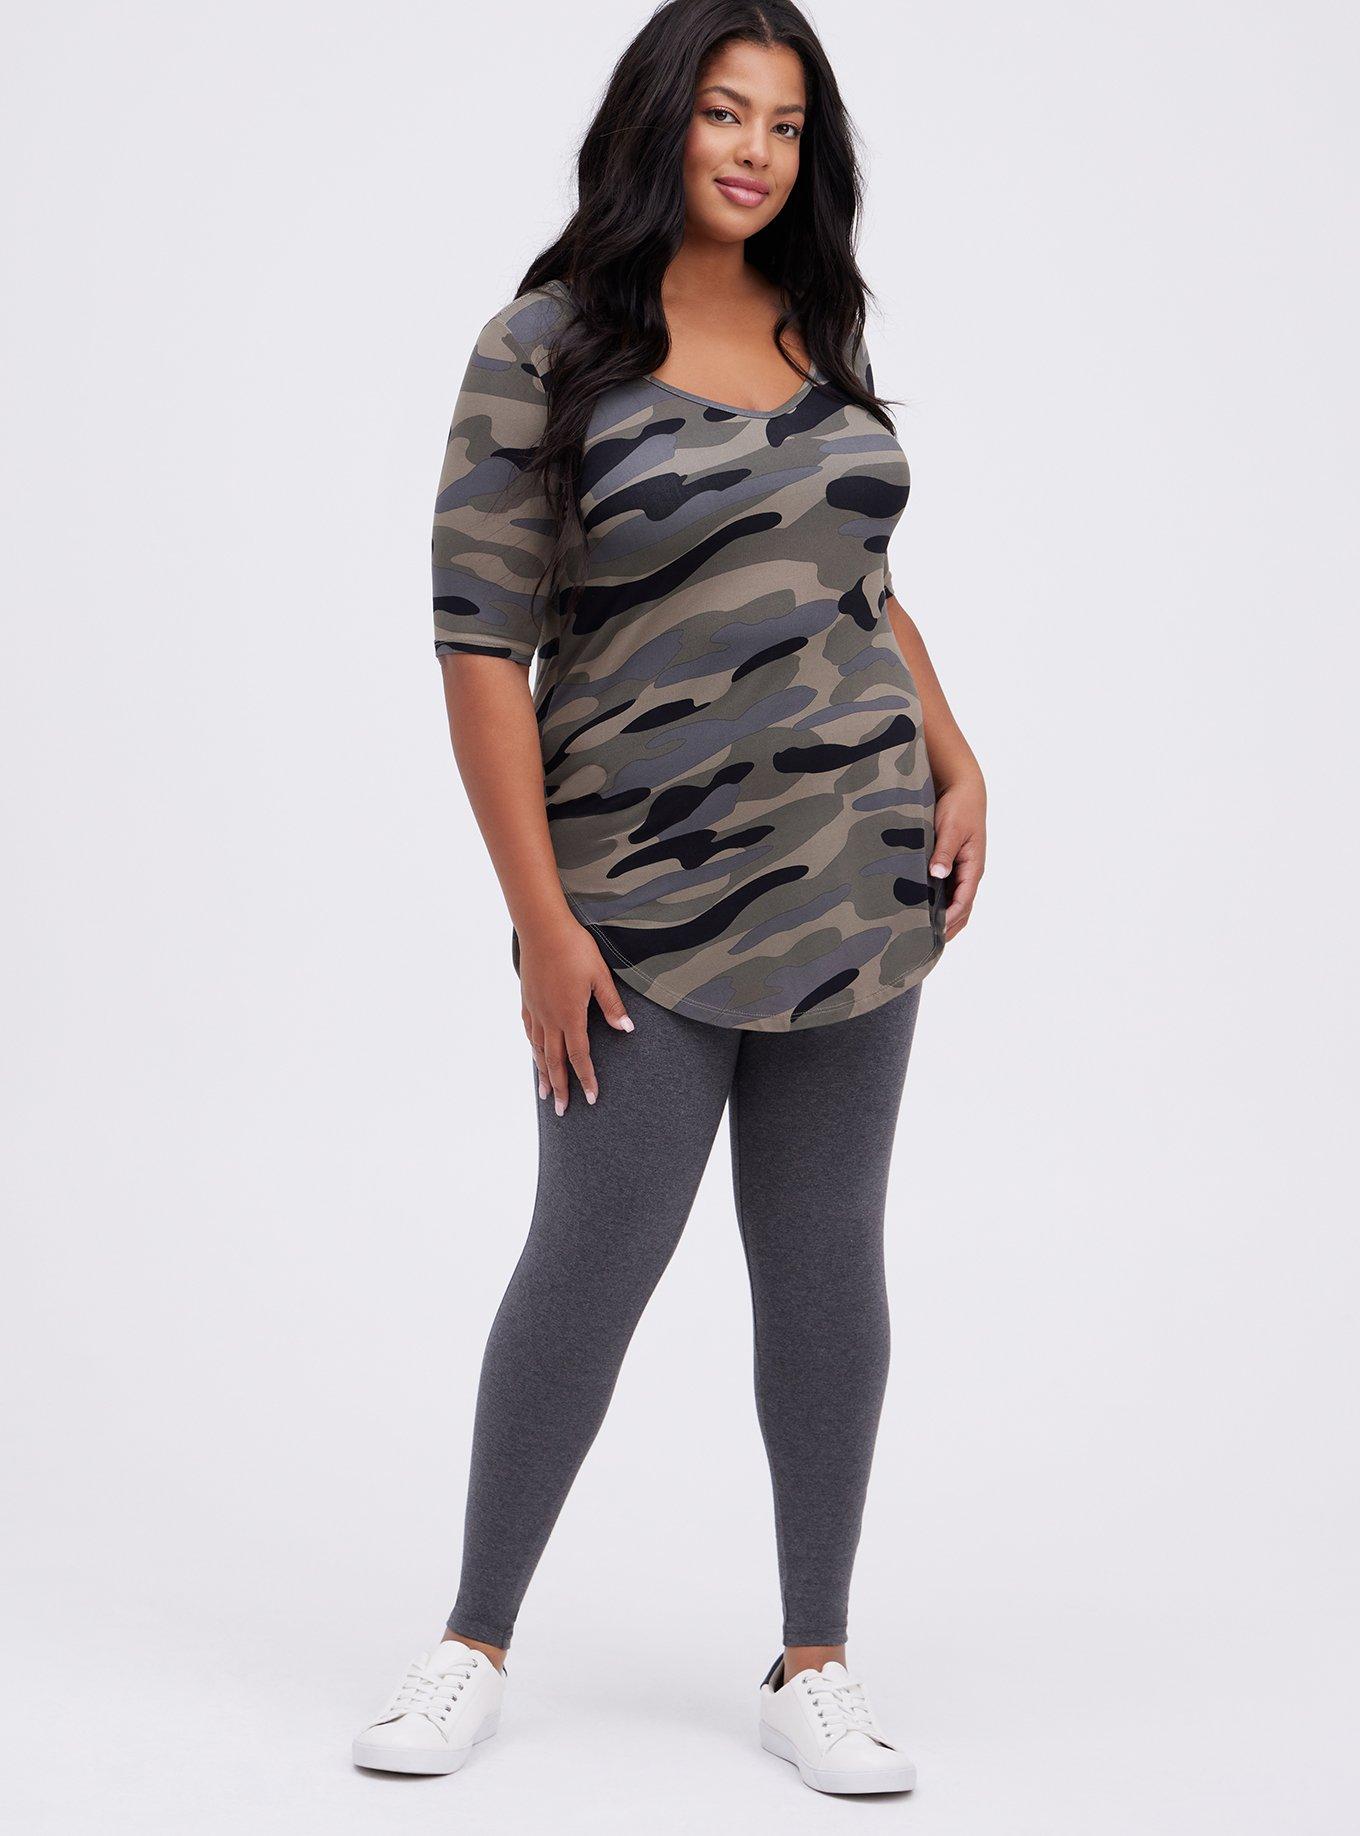 Plus Size - Charcoal Sweater Tights - Torrid